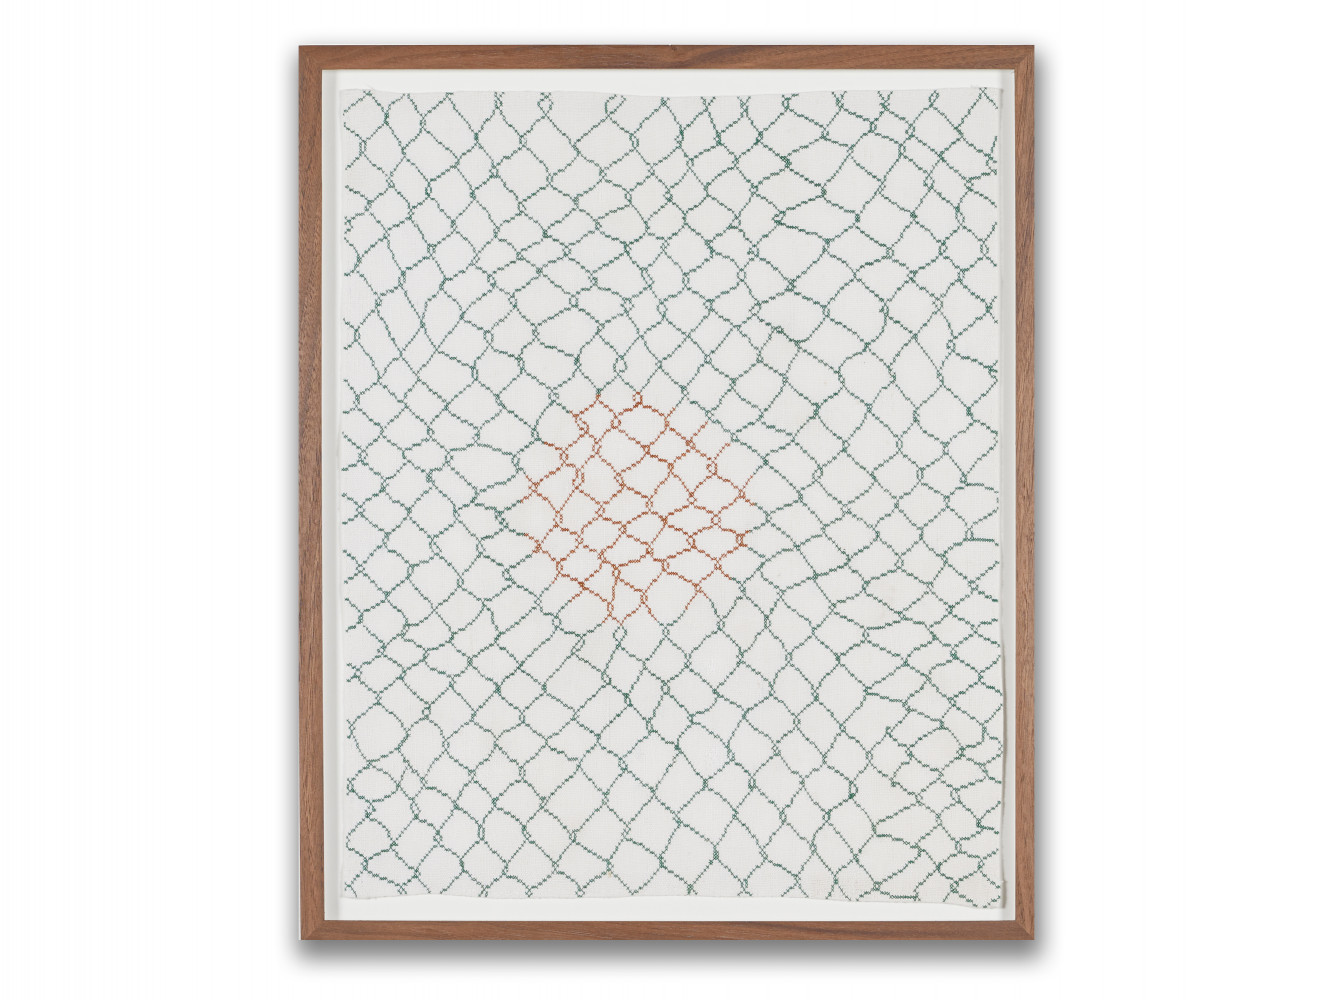 Des Hughes, ‘Holes in the Fence’, Cotton silk stitch on linen